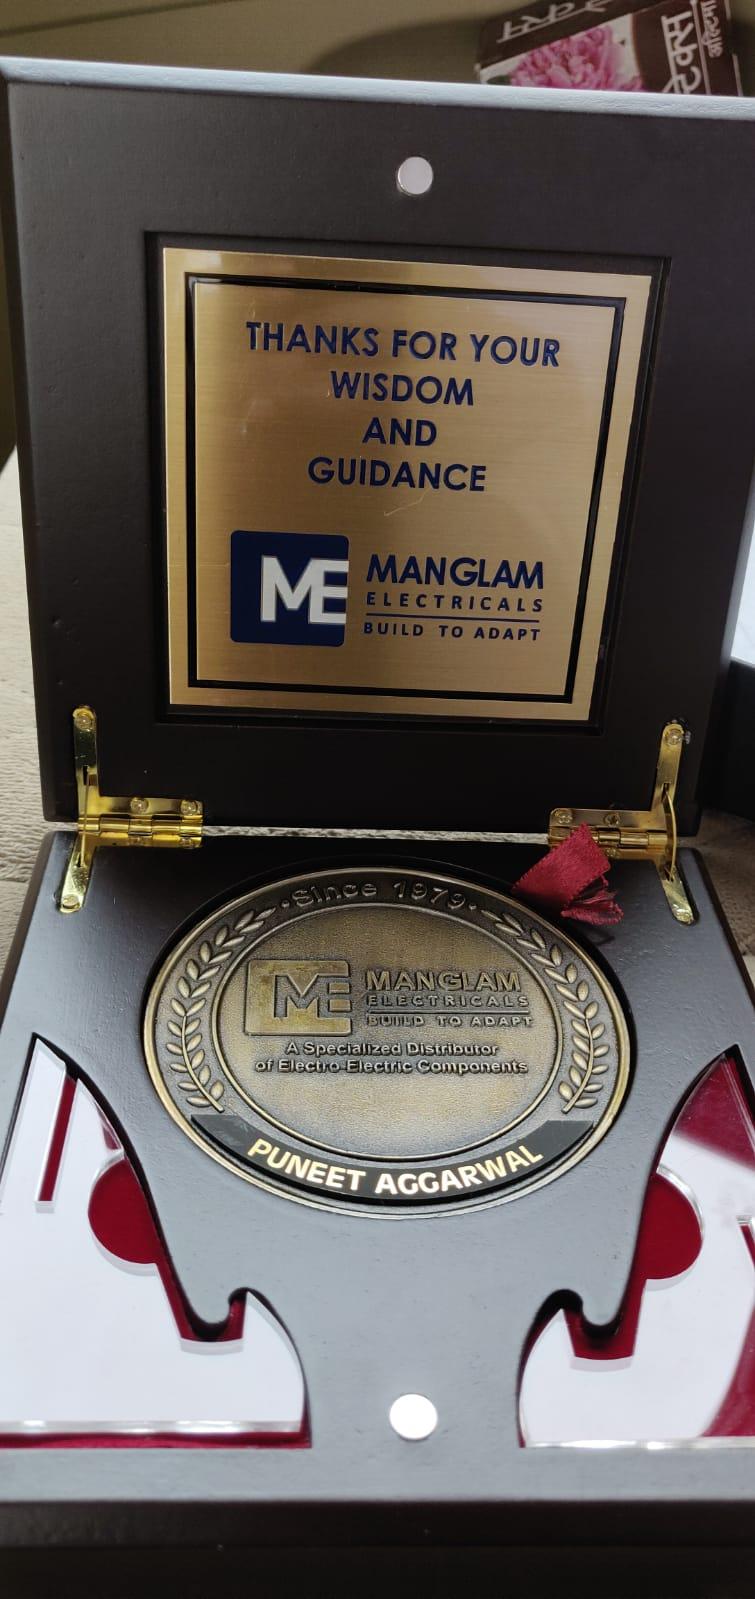 Felicitation from Manglam Electricals - Memento Awarded to Puneet Aggarwal - Founder of 7 dot 2 IT Consulting